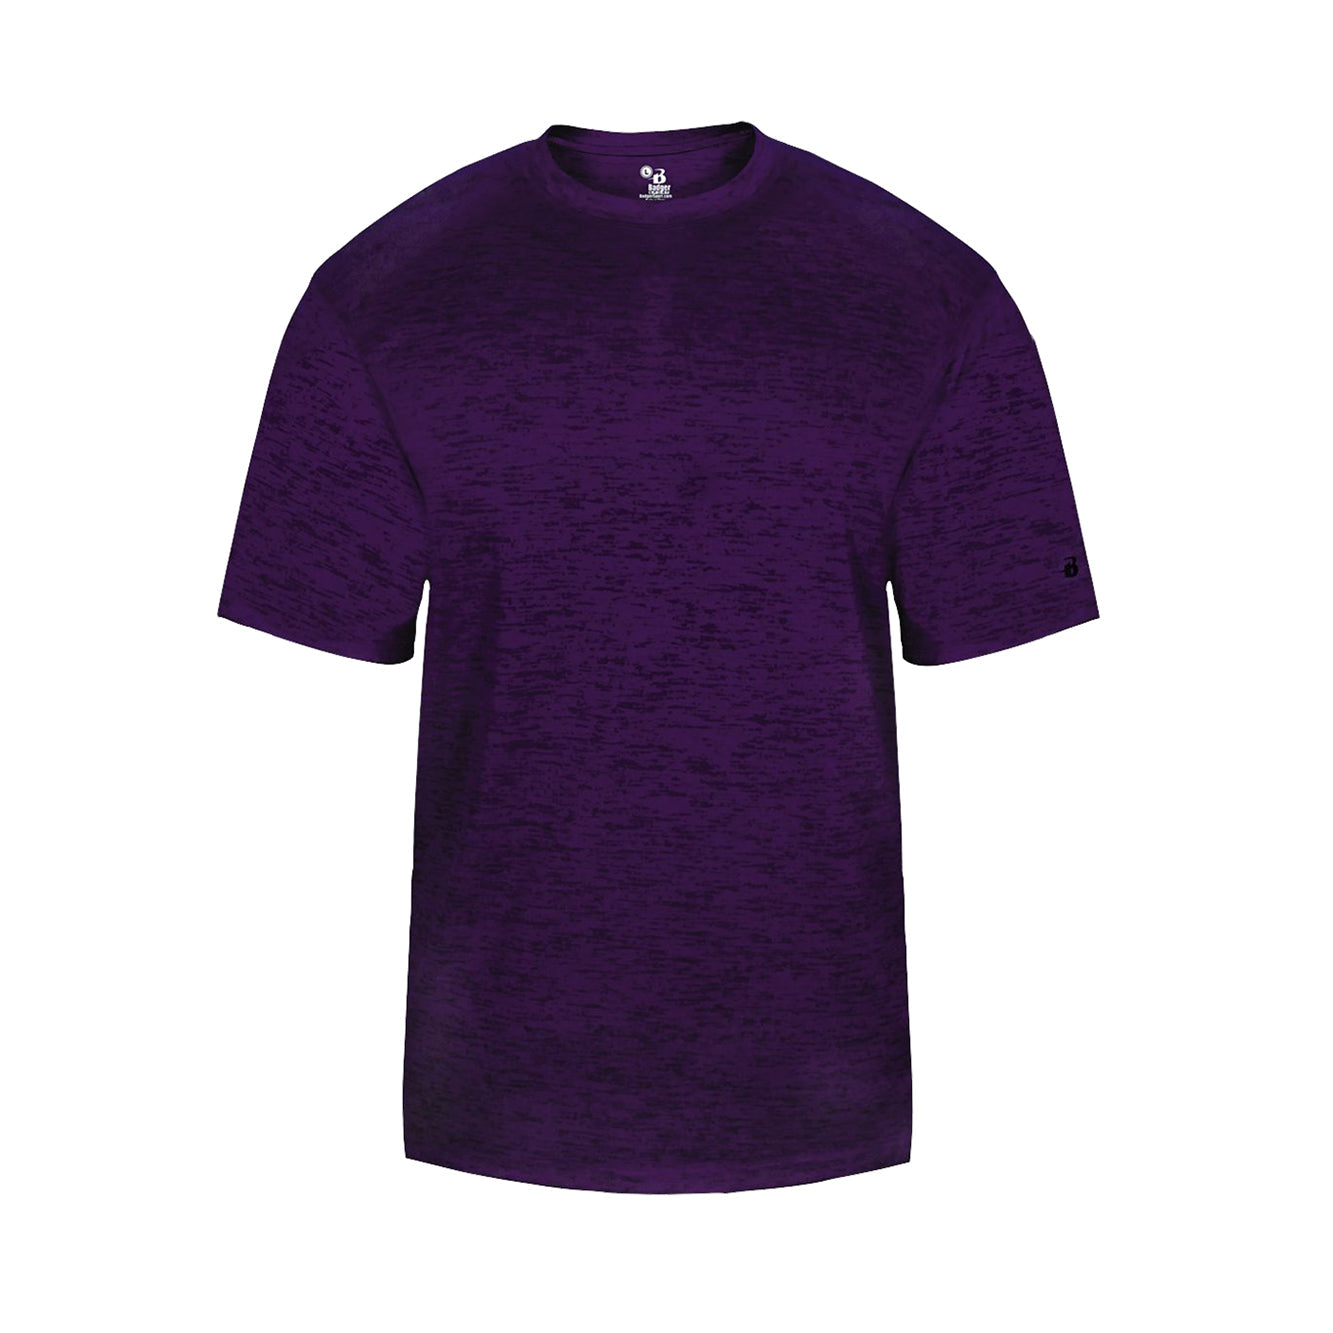 Tonal Blend Performance Jersey - Youth